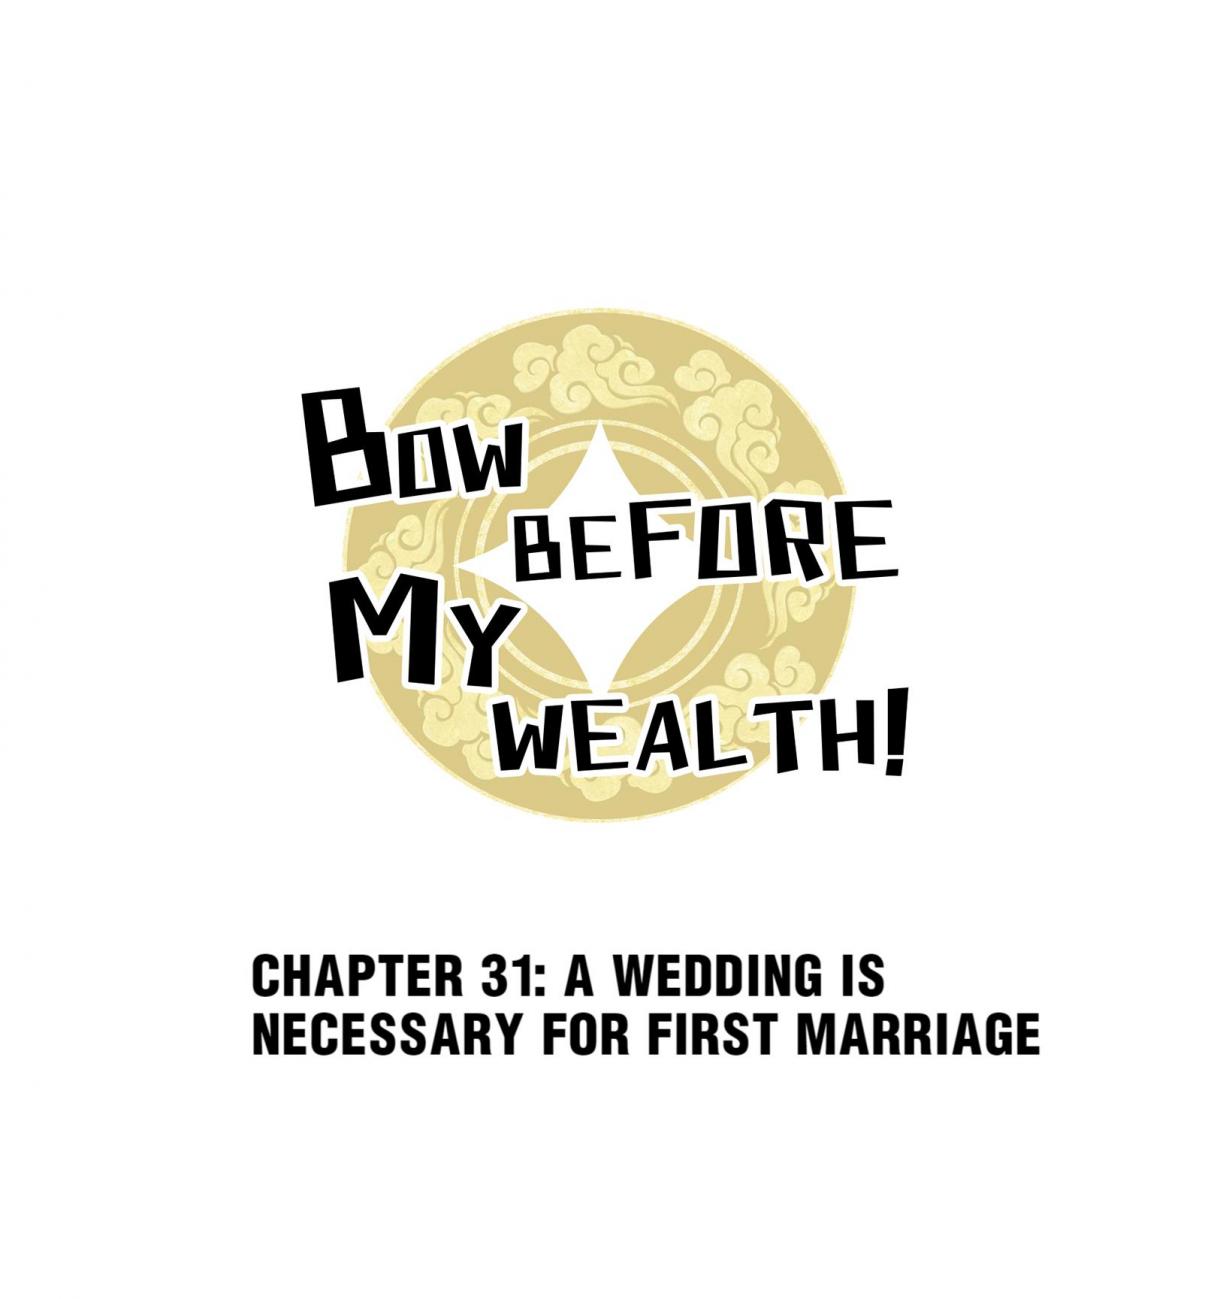 Bow Before My Wealth! 31.1 A Wedding is Necessary for First Marriage